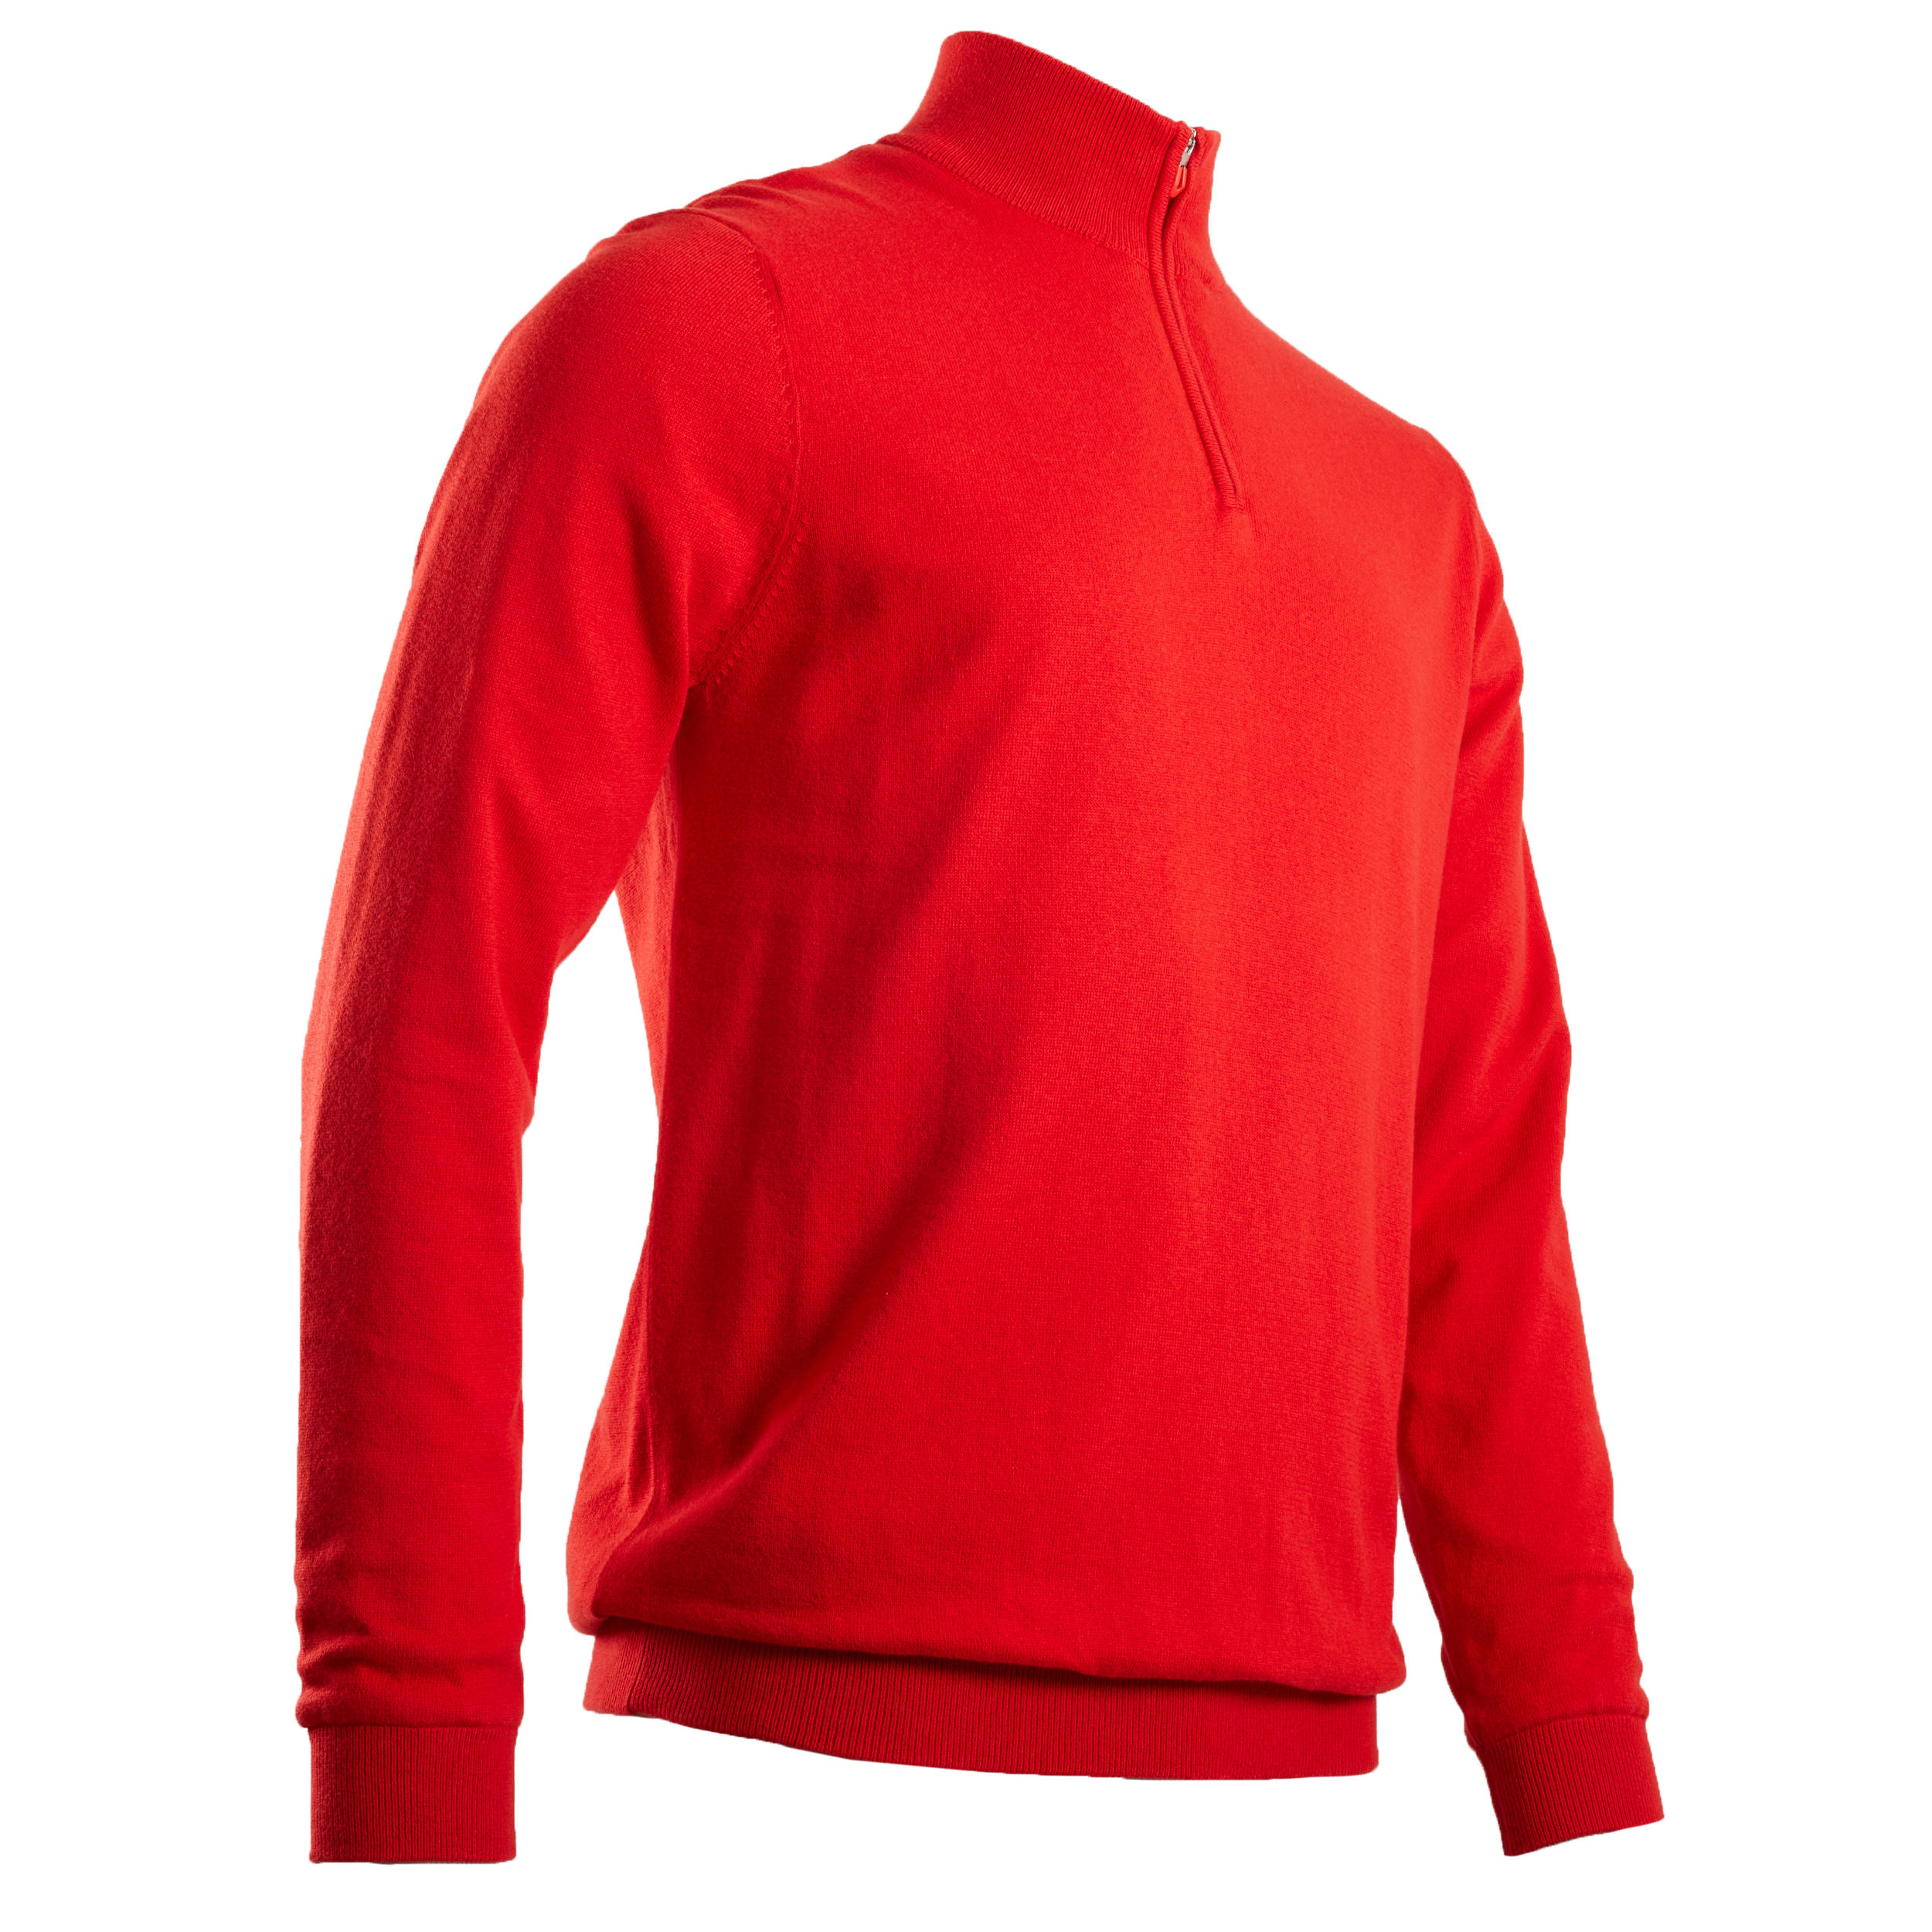 Men's golf windproof pullover MW500 red 6/6